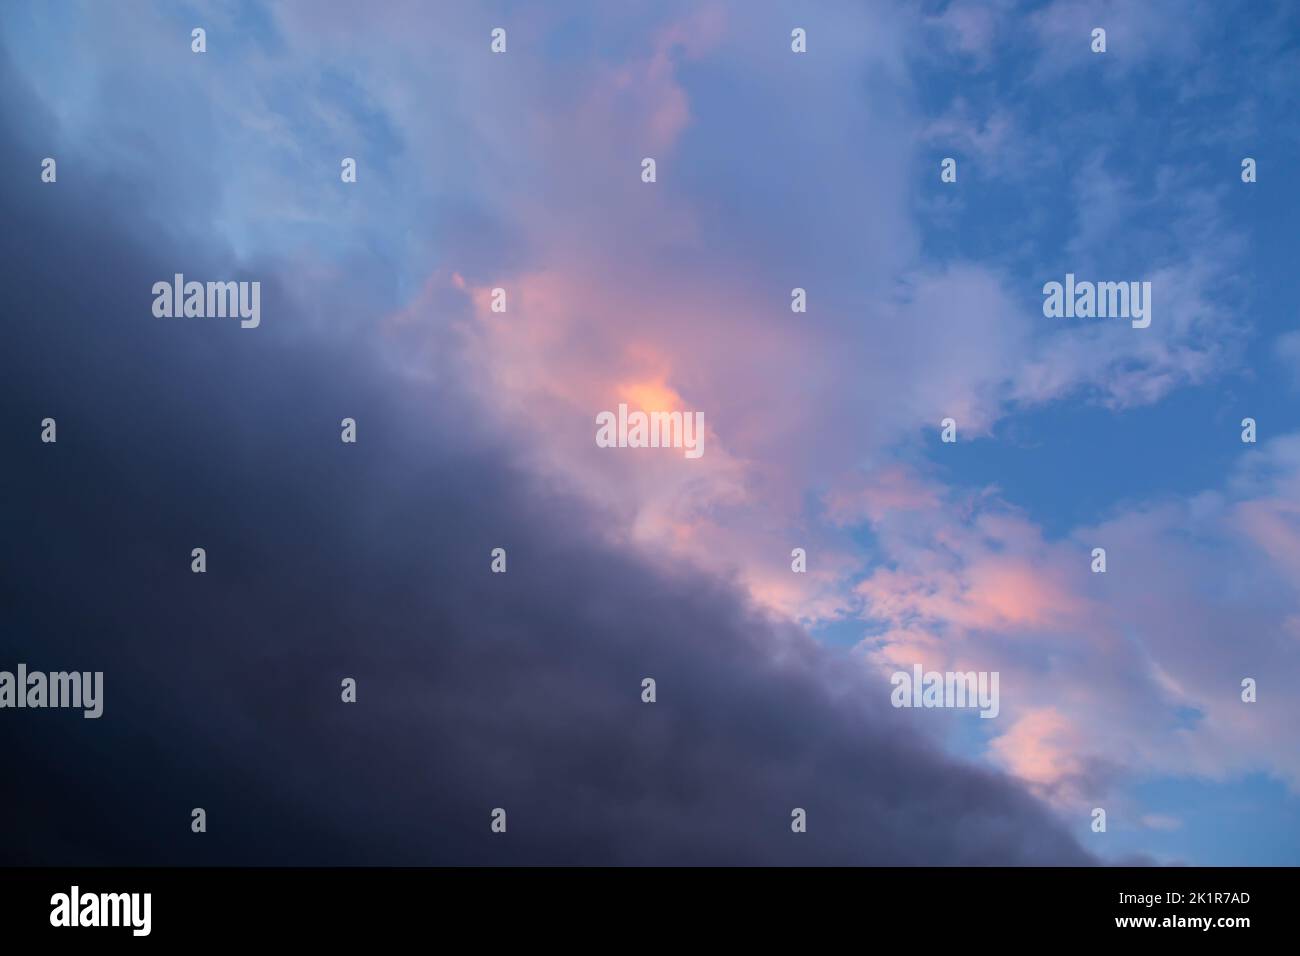 Stormy dramatic sky with clouds at sunset, divided diagonally Stock Photo